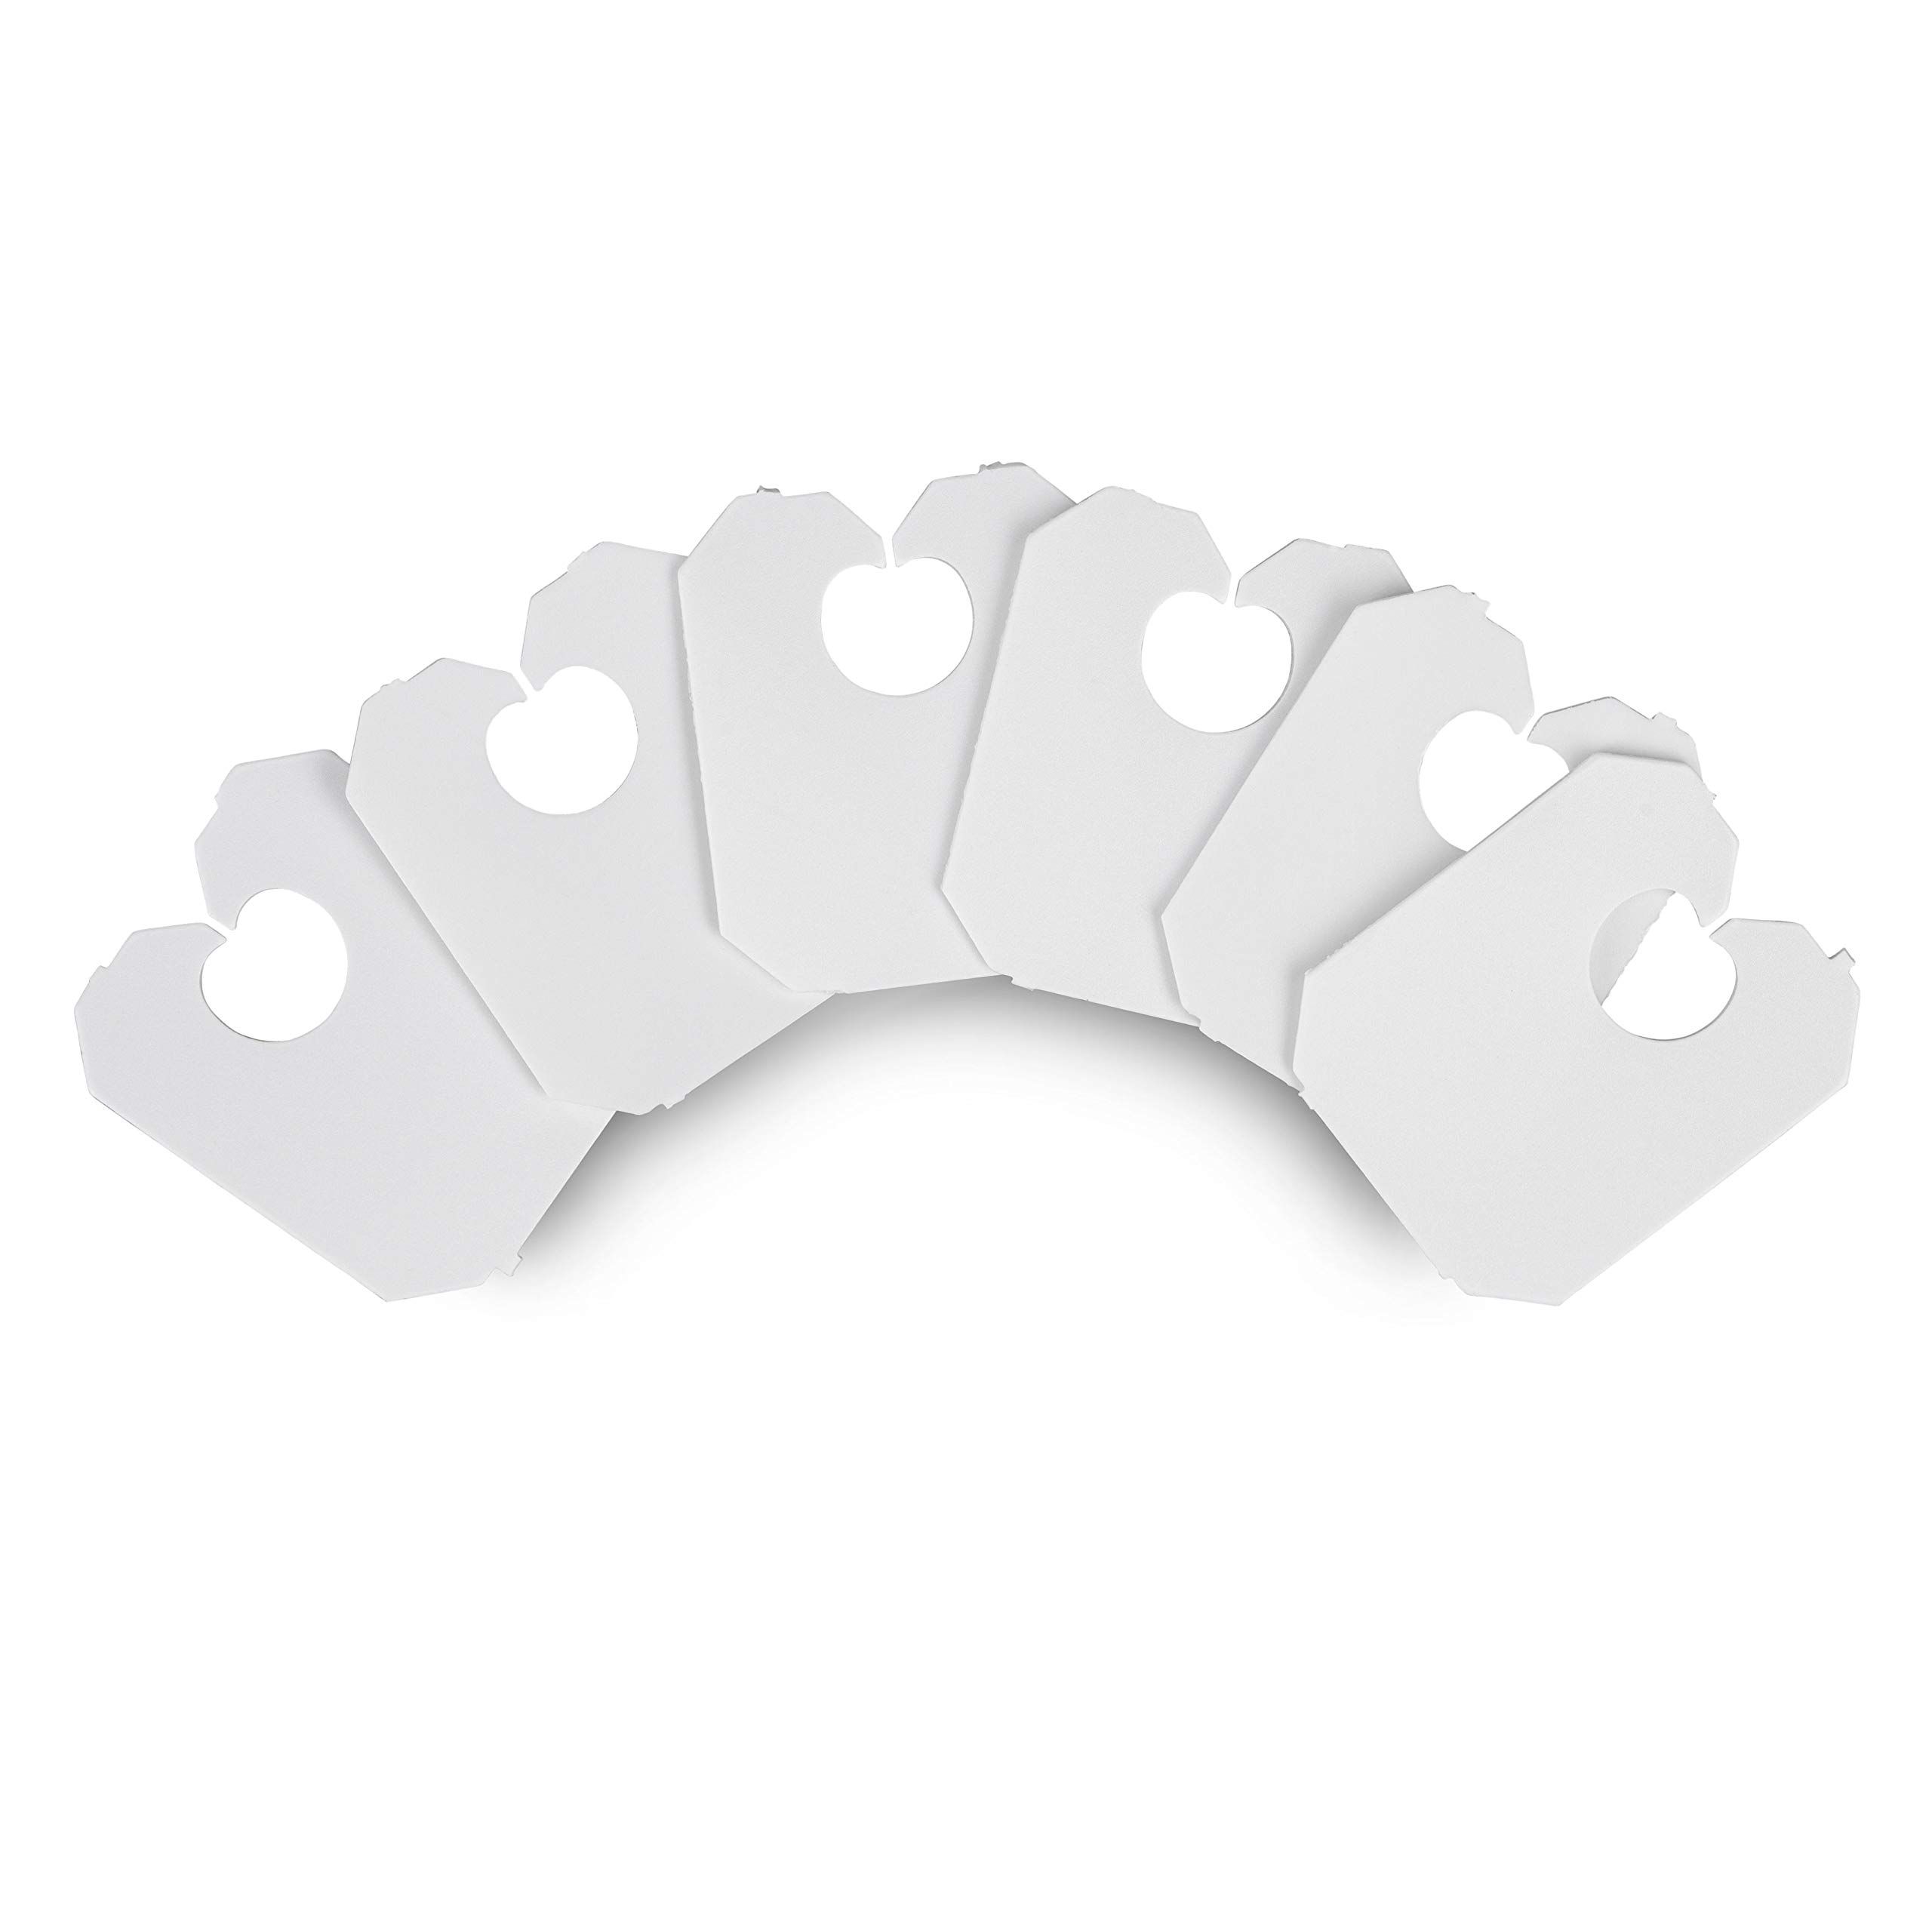 100 Pcs Reusable Plastic Bread Clips - Keep Your Food Fresh with 7/8 x 7/8  in